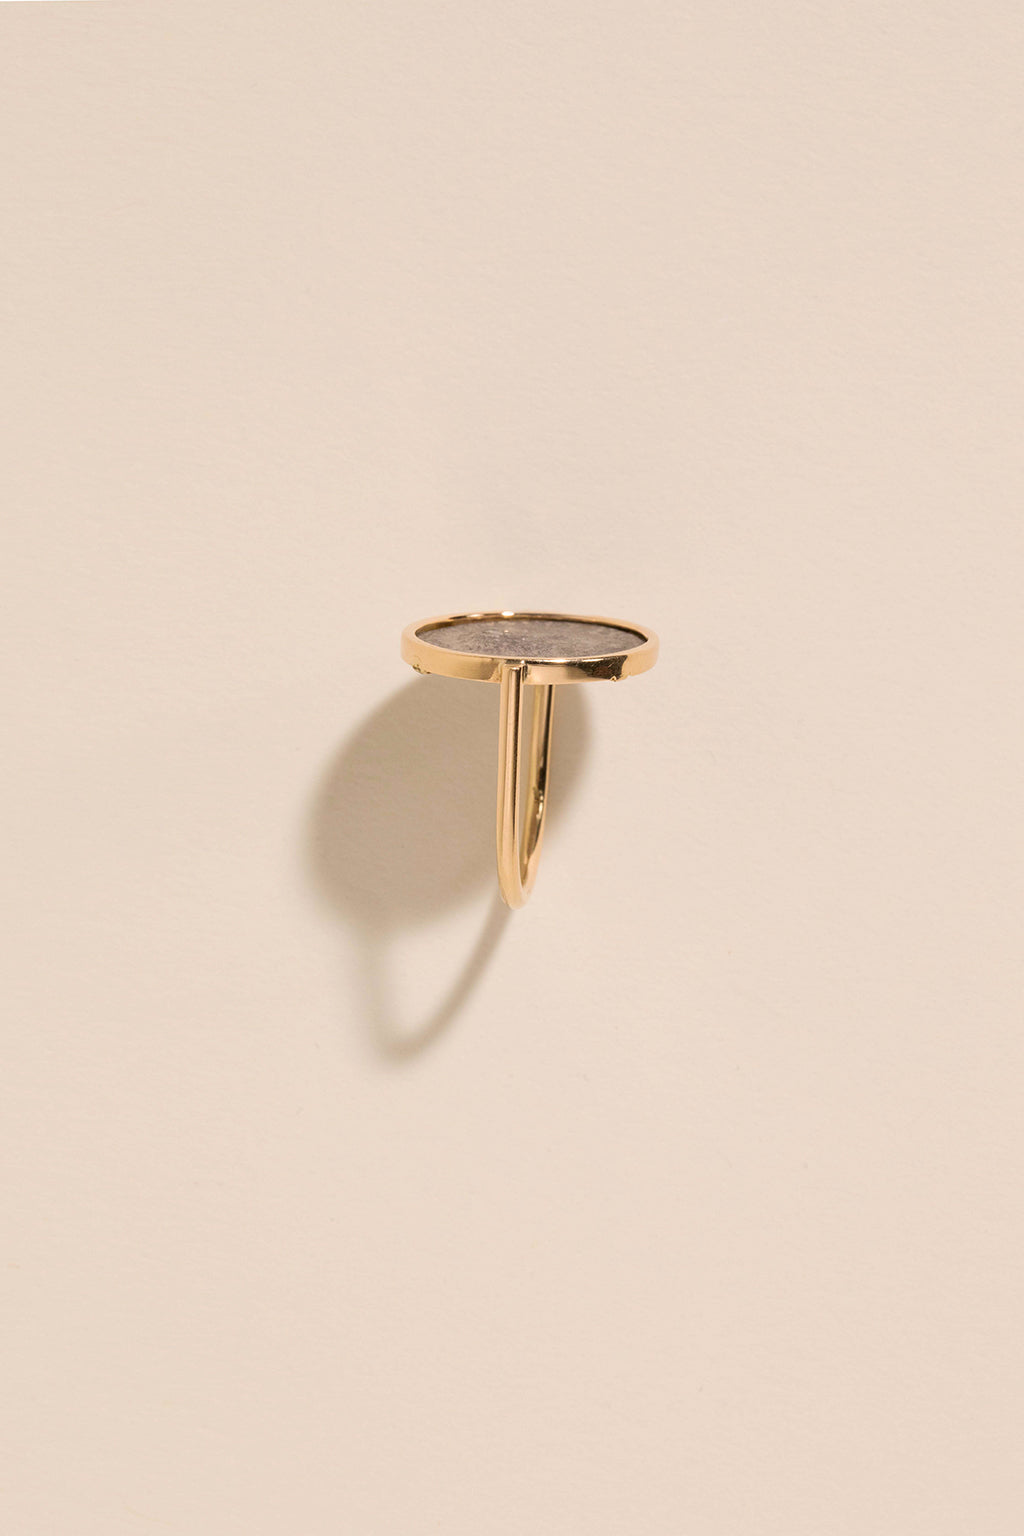 N°05 Collection 02 l RING - DENIER